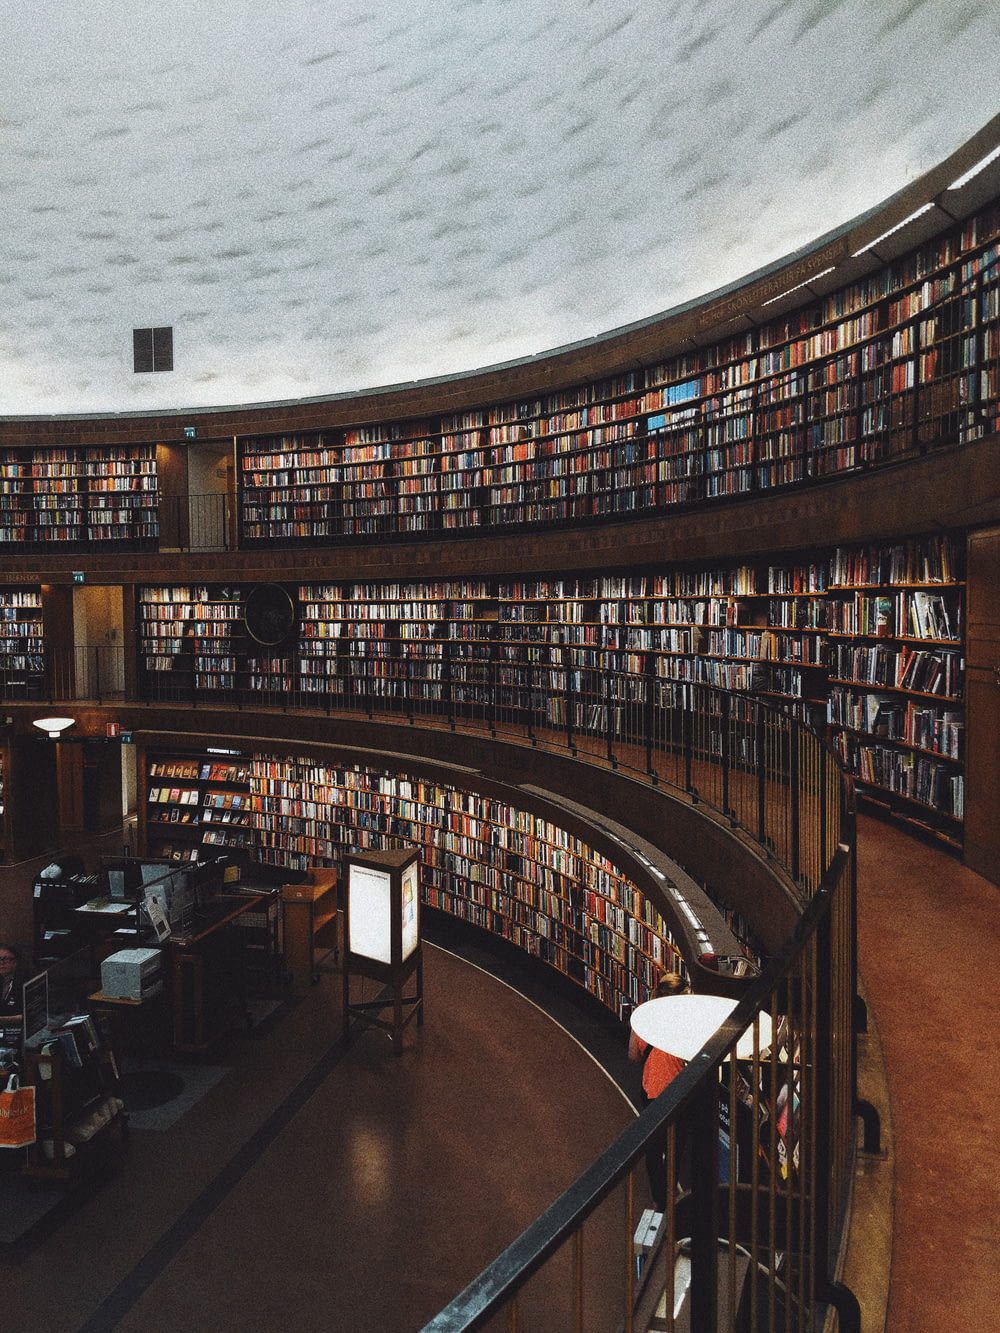 a library filled with lots of books under a cloudy sky